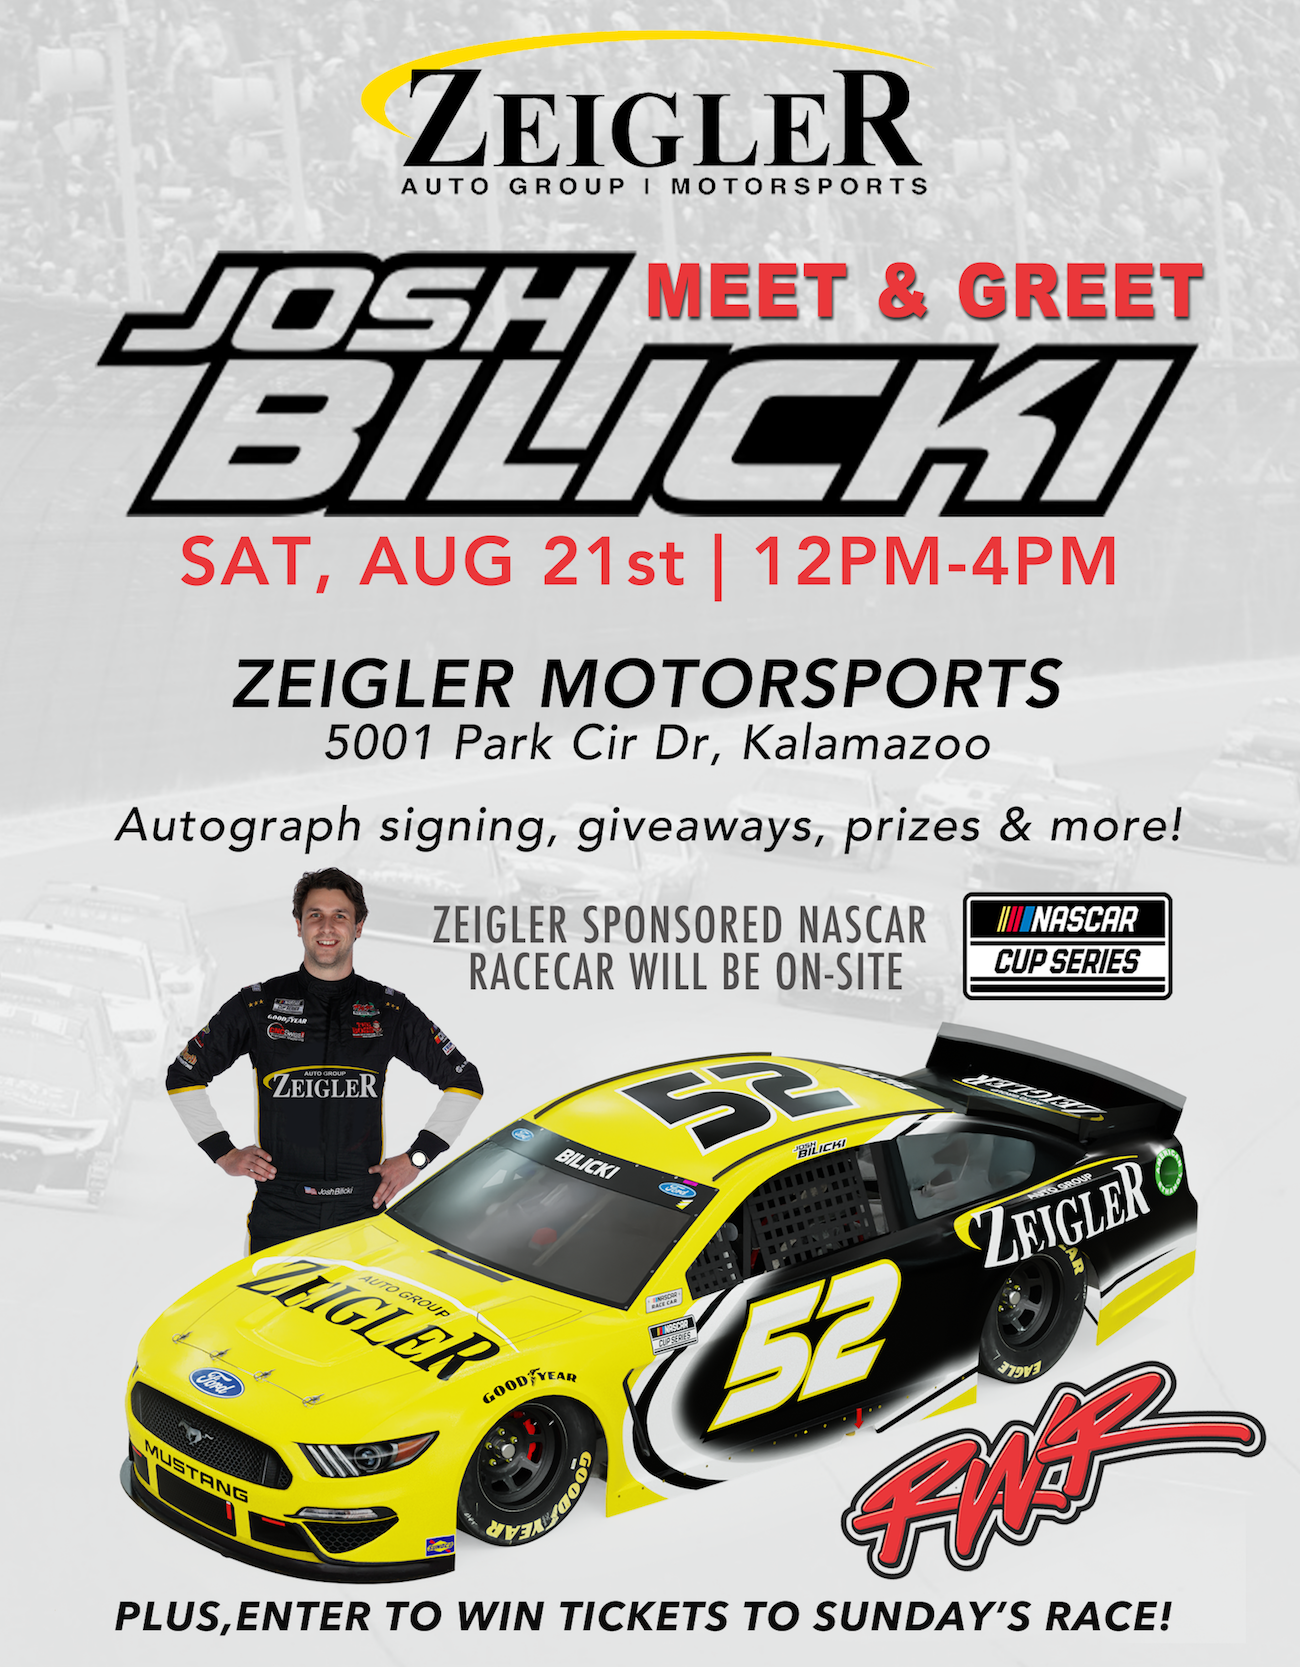 Zeigler to host official Meet & Greet for Josh Bilicki on Saturday, August 21, 2021 from noon to 4:00p.m. at Zeigler Motorsports